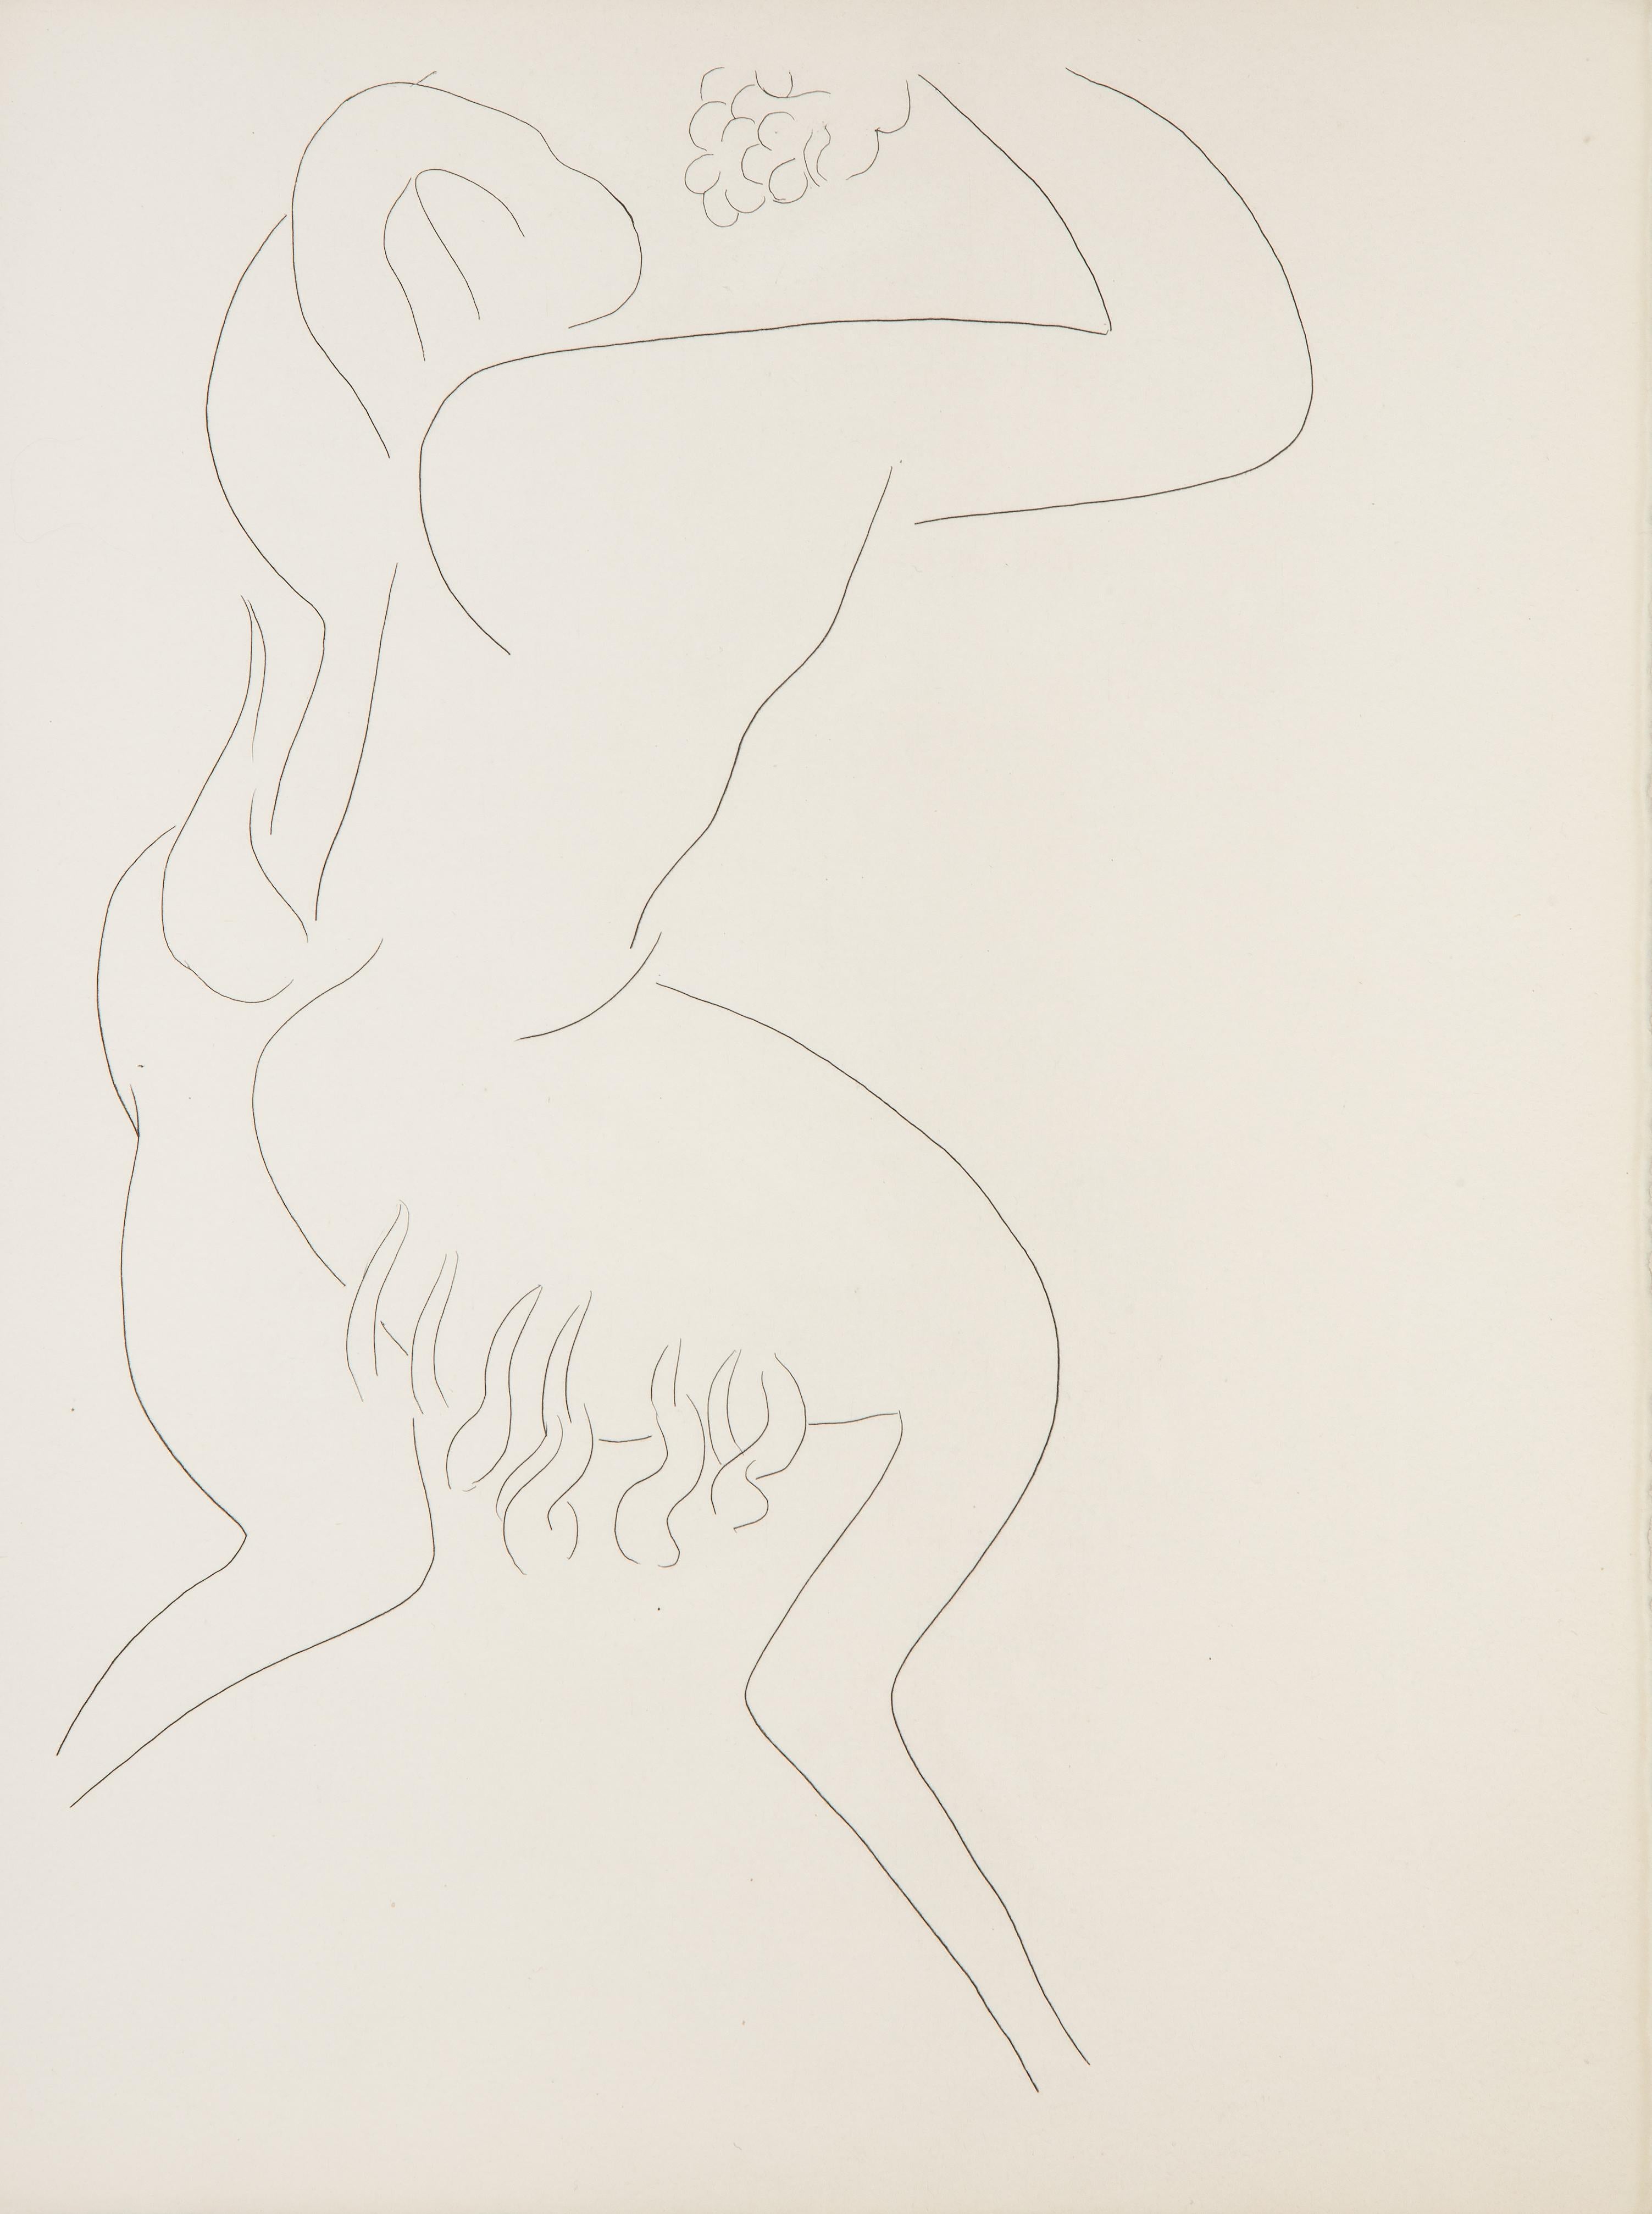 L'Apres-Midi D'un Faune From Poesies, Modern Etching by Henri Matisse